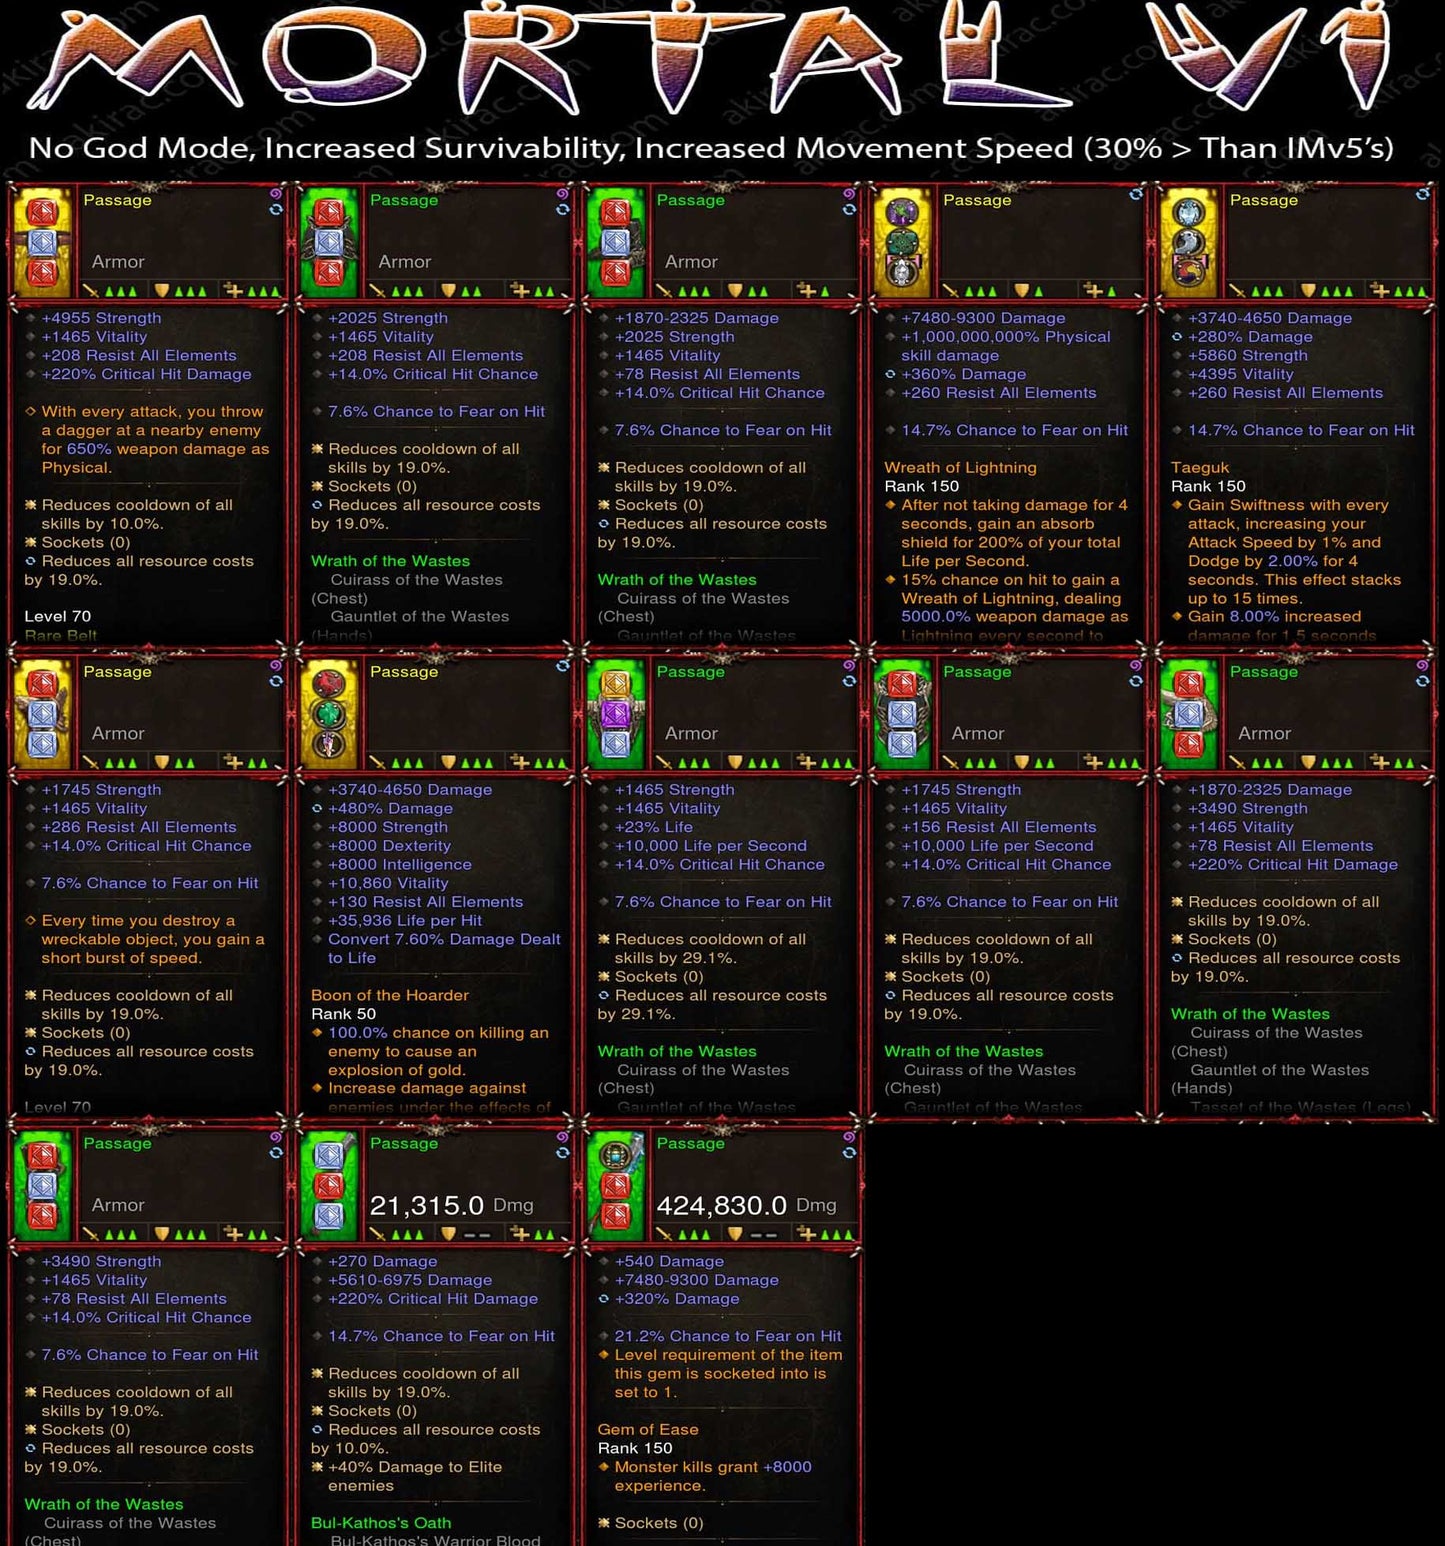 [Primal Ancient] [ Quad DPS] Mortality v1 Passage Super Movement Speed Waste Set Diablo 3 Mods ROS Seasonal and Non Seasonal Save Mod - Modded Items and Gear - Hacks - Cheats - Trainers for Playstation 4 - Playstation 5 - Nintendo Switch - Xbox One